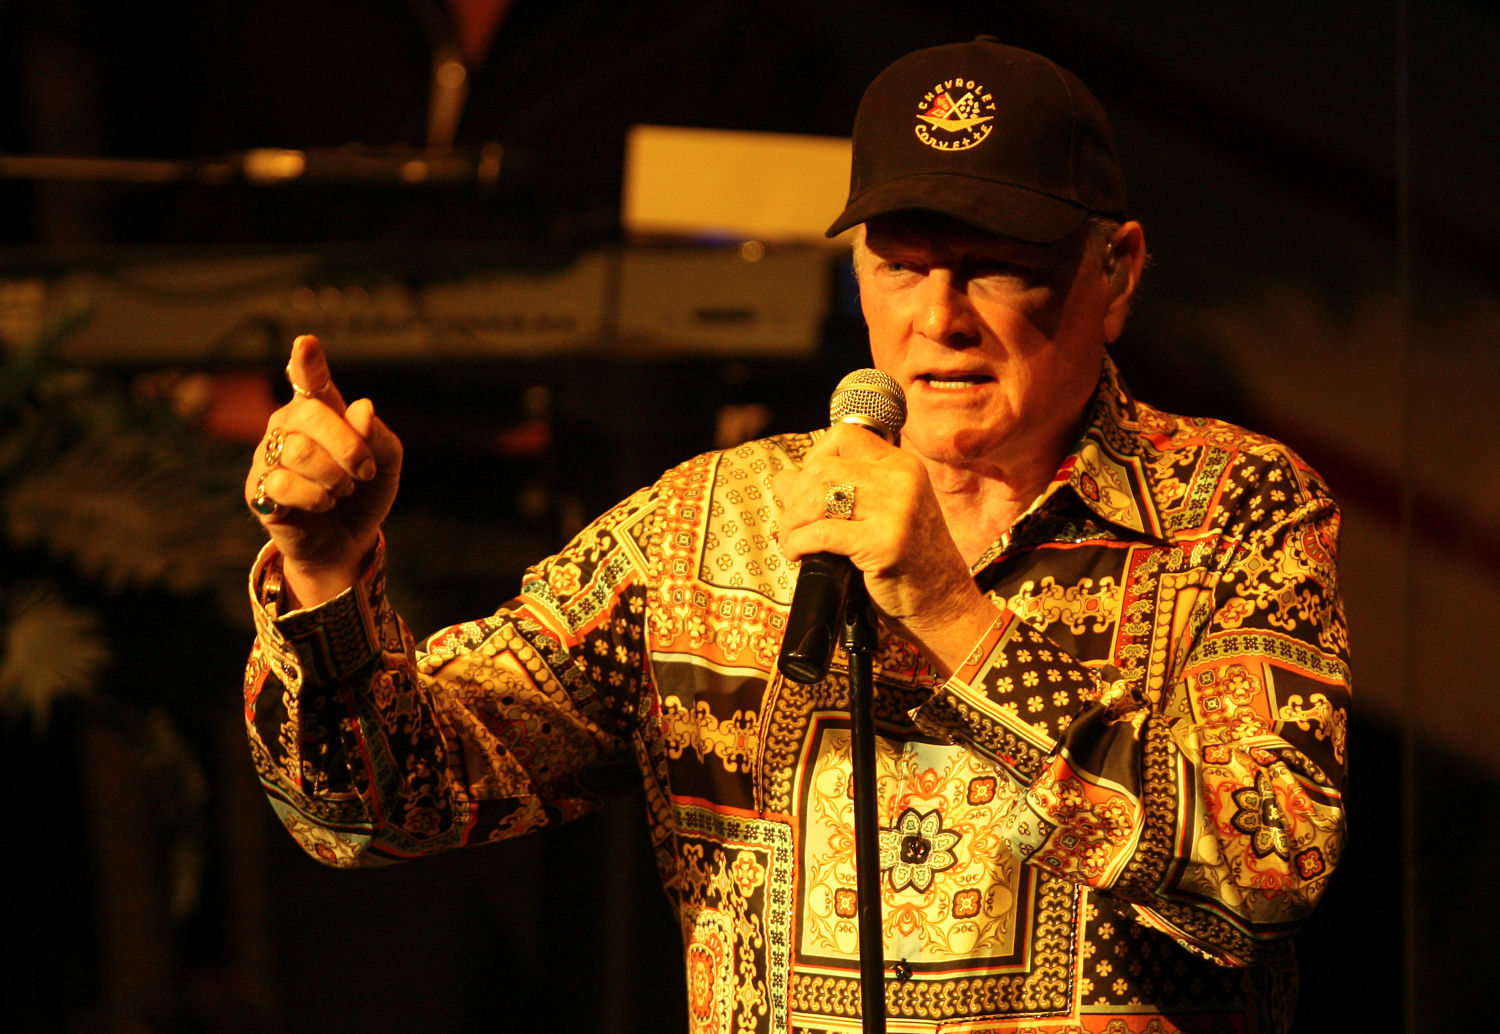 Original band member Mike Love and The Beach Boys perform at the Mississippi Moon Bar inside Diamond Jo Casino on Saturday. PHOTO CREDIT: Nicki Kohl